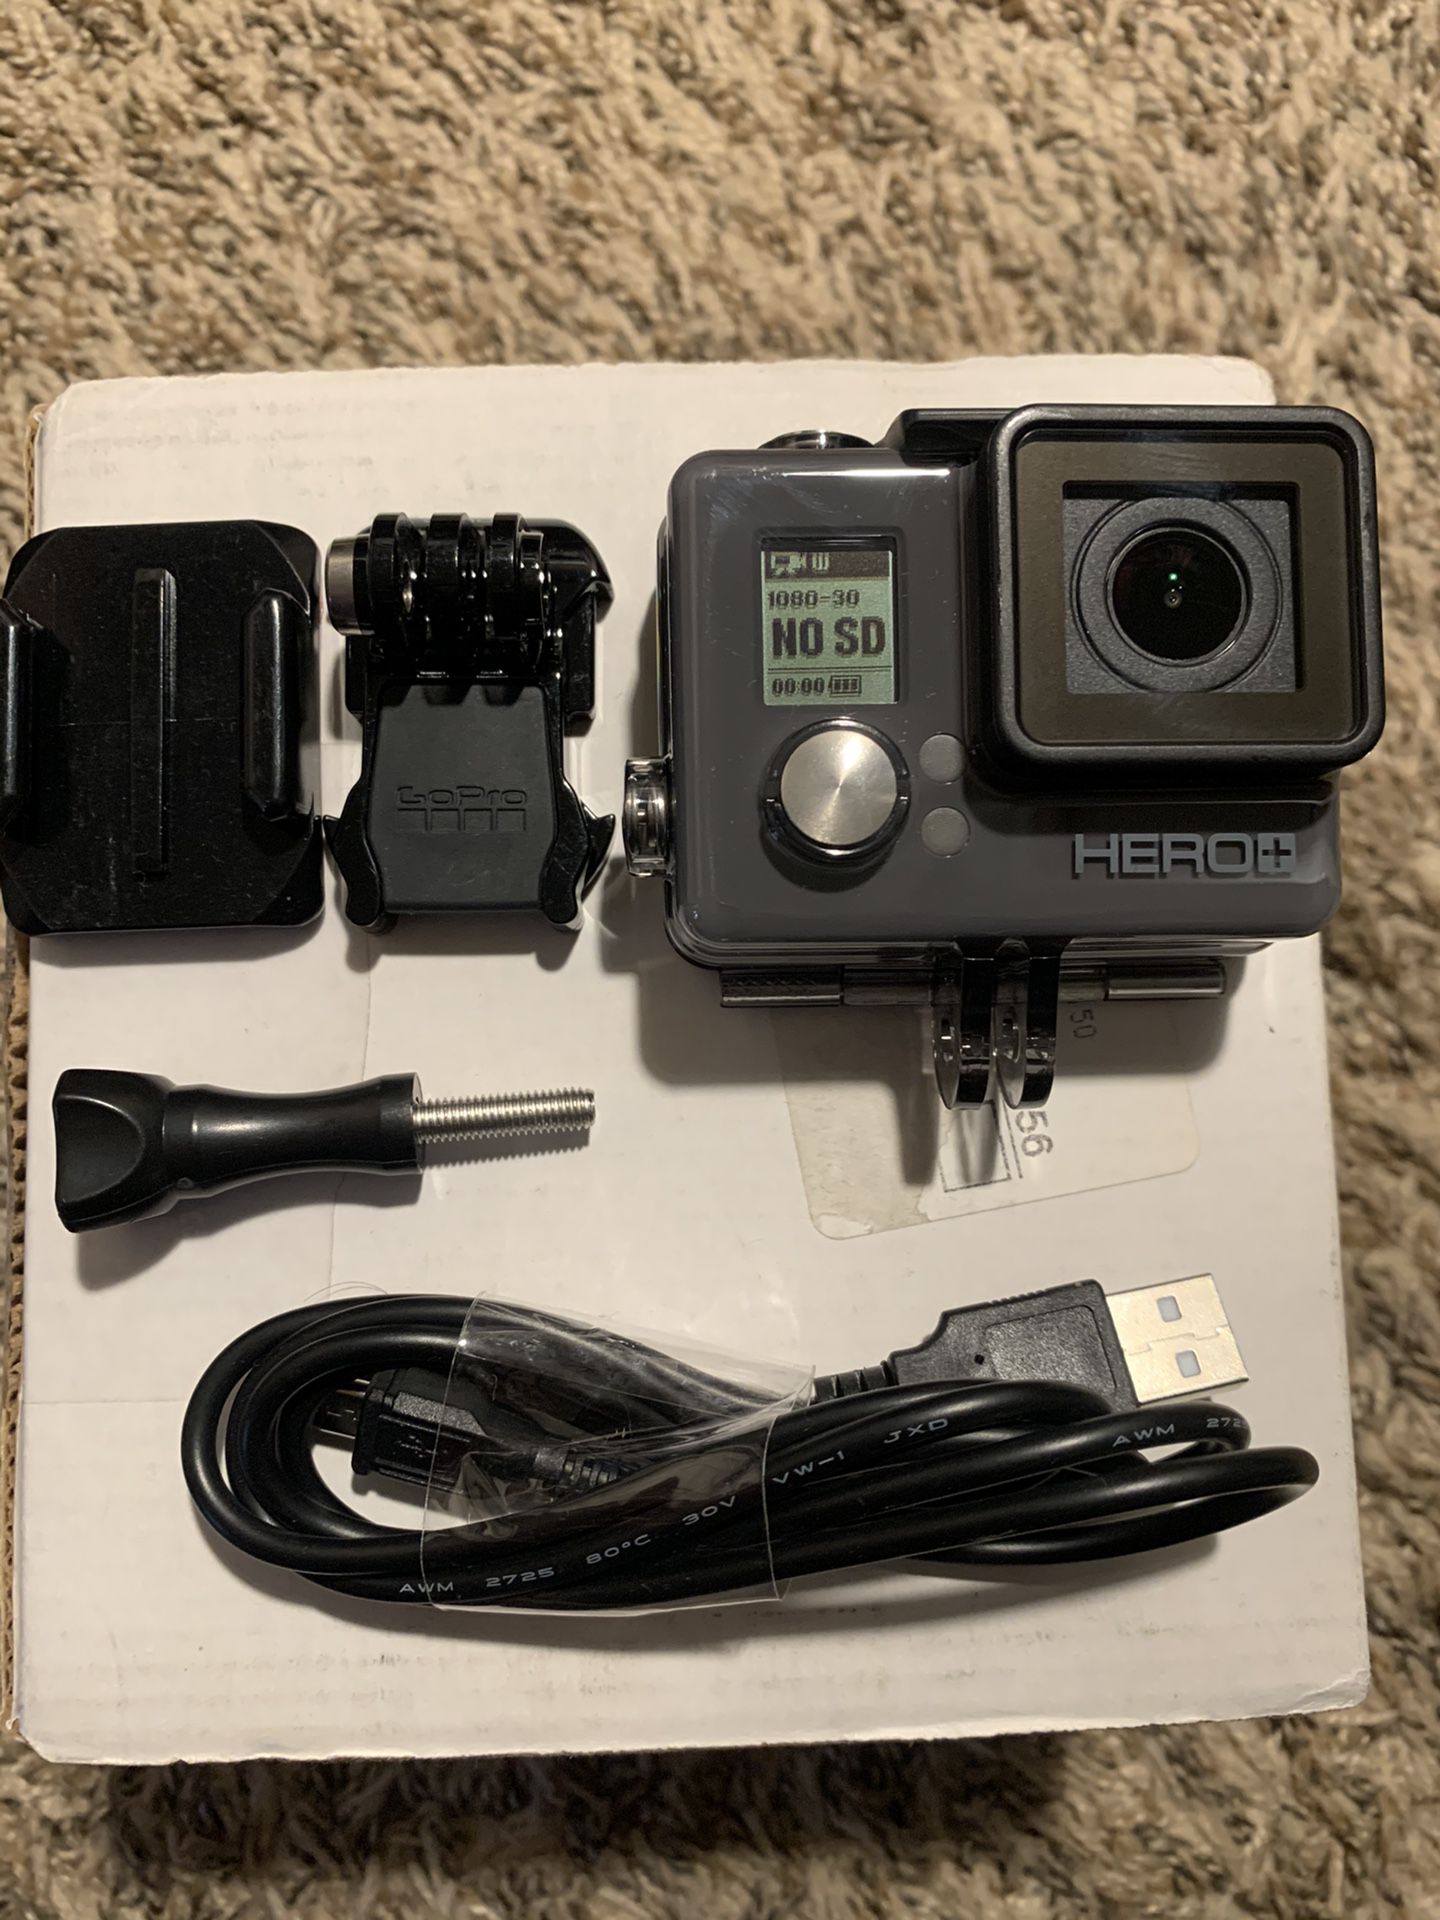 GoPro Hero+ plus Waterproof Touch Screen Wifi Camcorder Action Camera